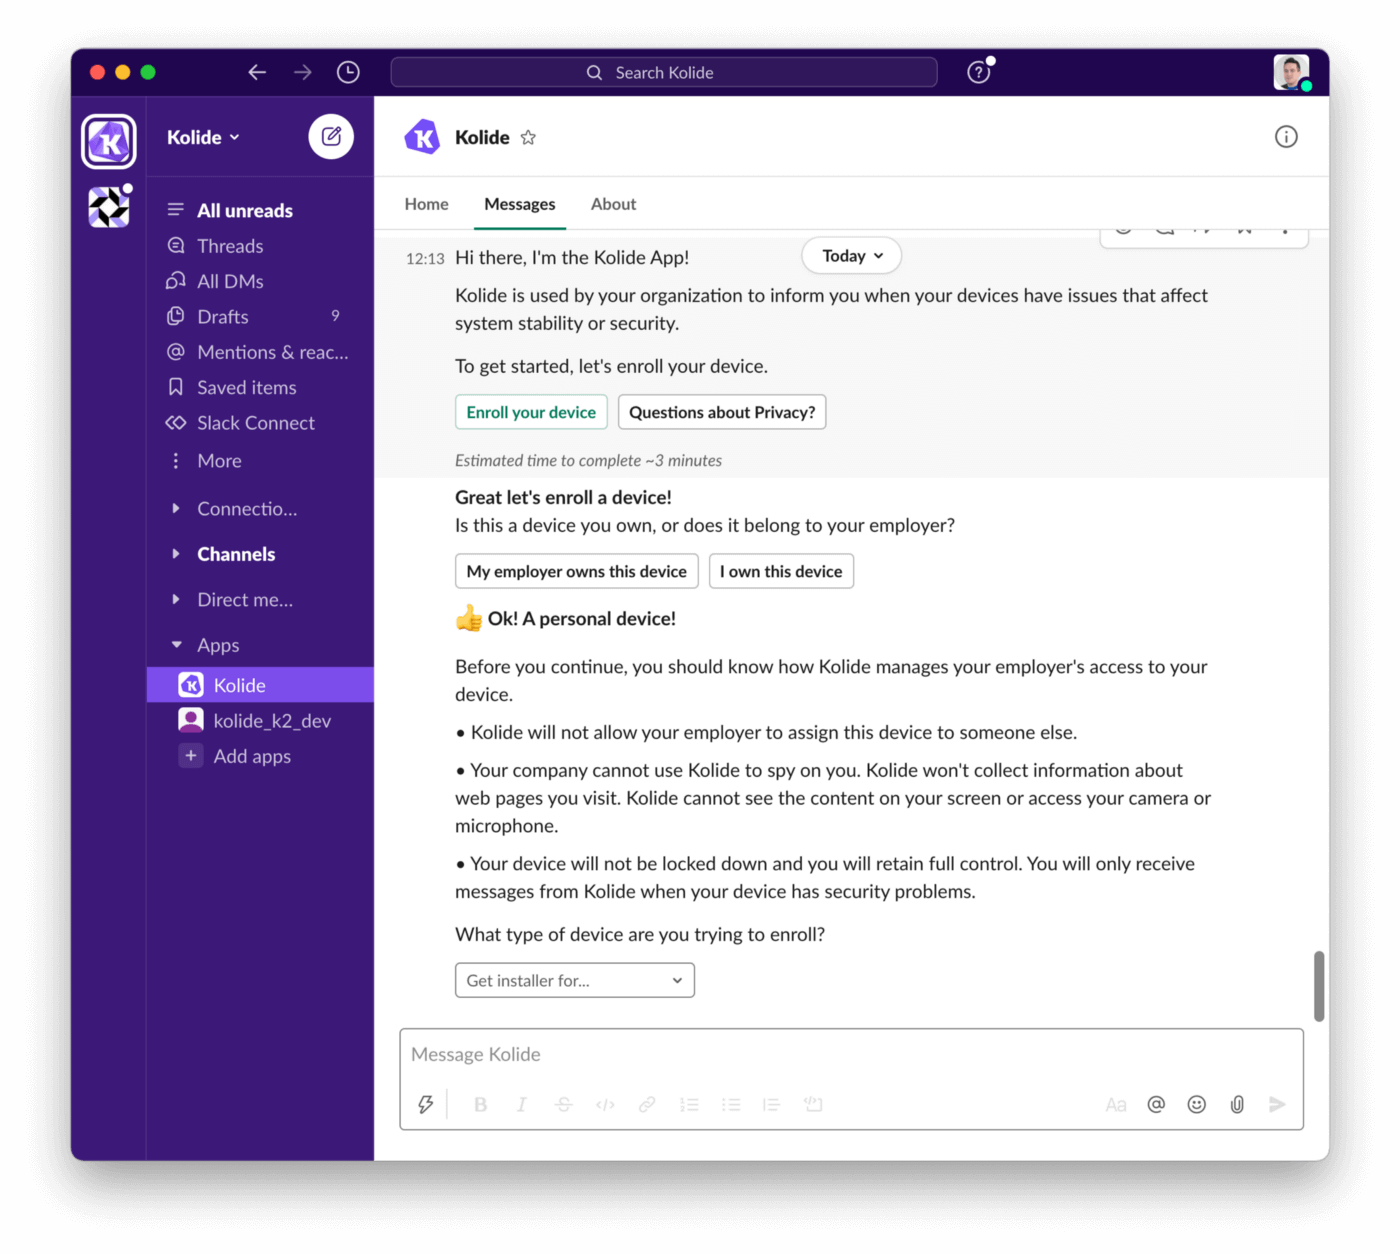 A screenshot of Slack showing the Kolide app. The Kolide app is asking an end-user to enroll a device and presents a dropdown menu of installers to choose from